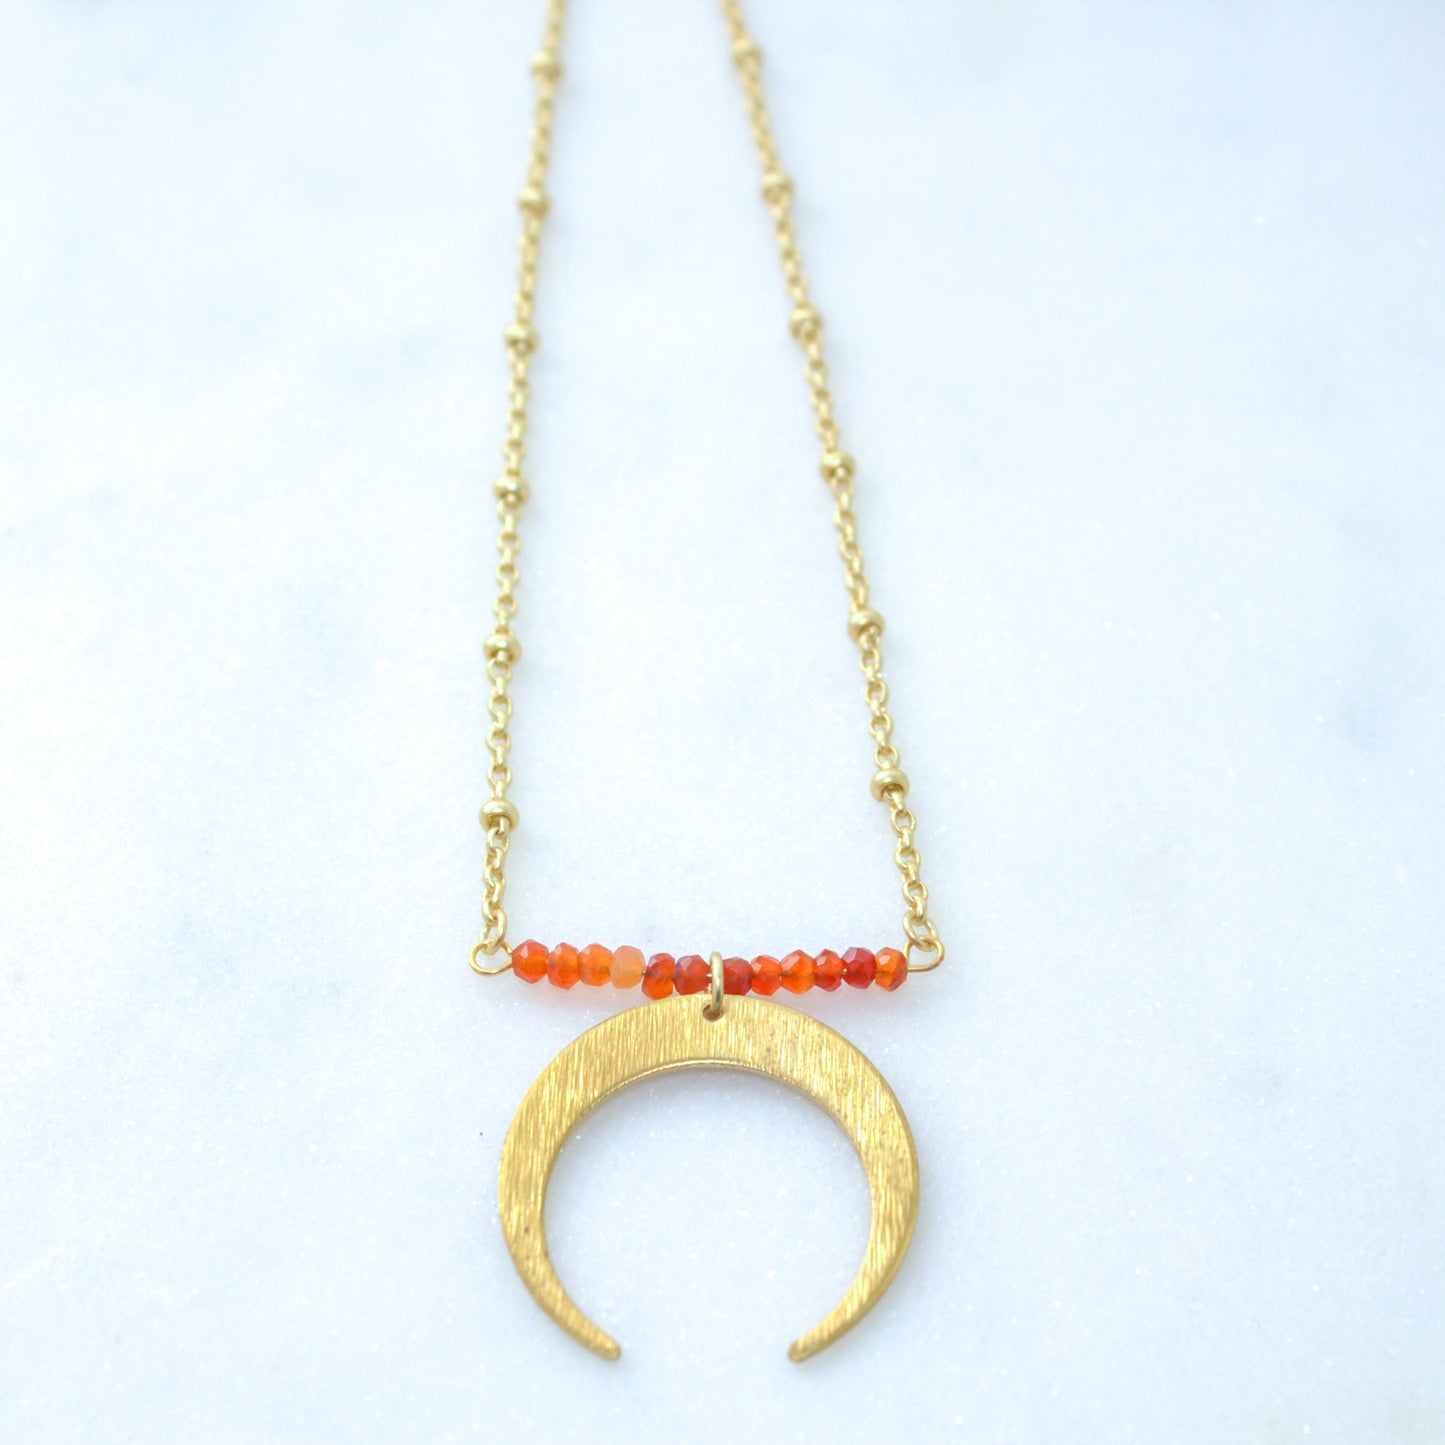 Shades of Citrine + Crescent Moon Necklace